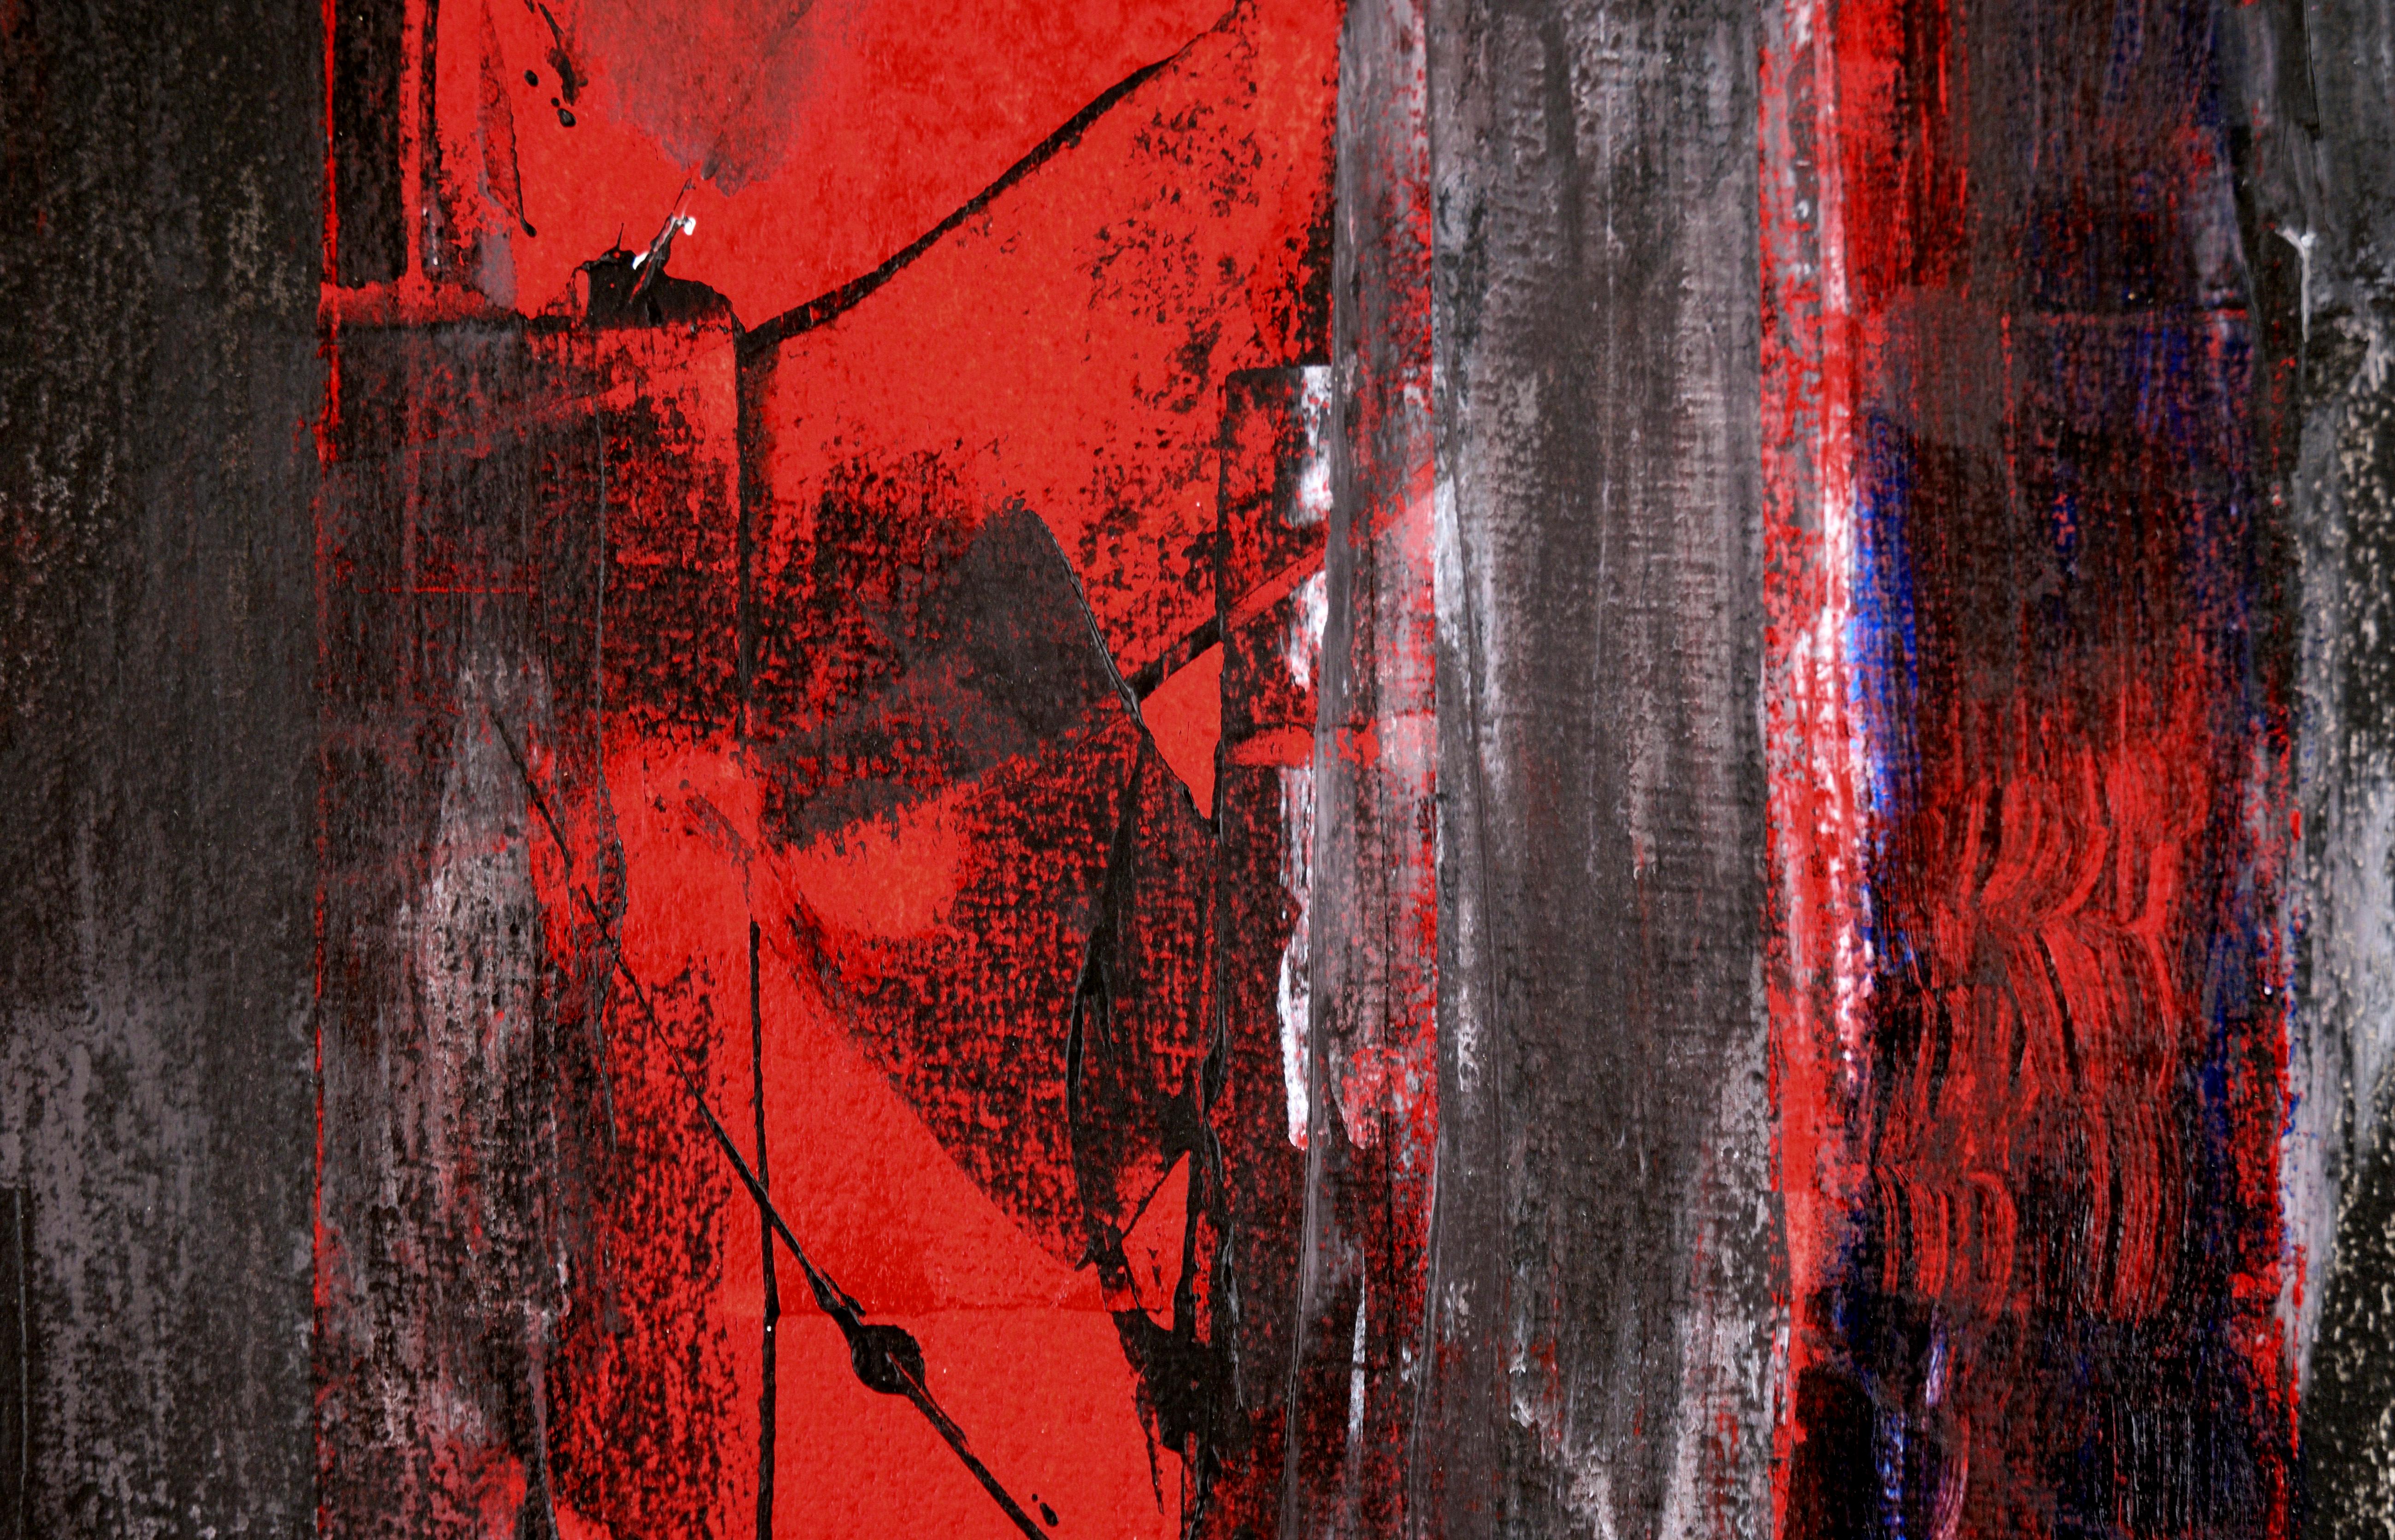 Red Portal Abstract Impressionist Composition in Acrylic on Heavy Arches Paper - Black Abstract Painting by Ricardo de Silva